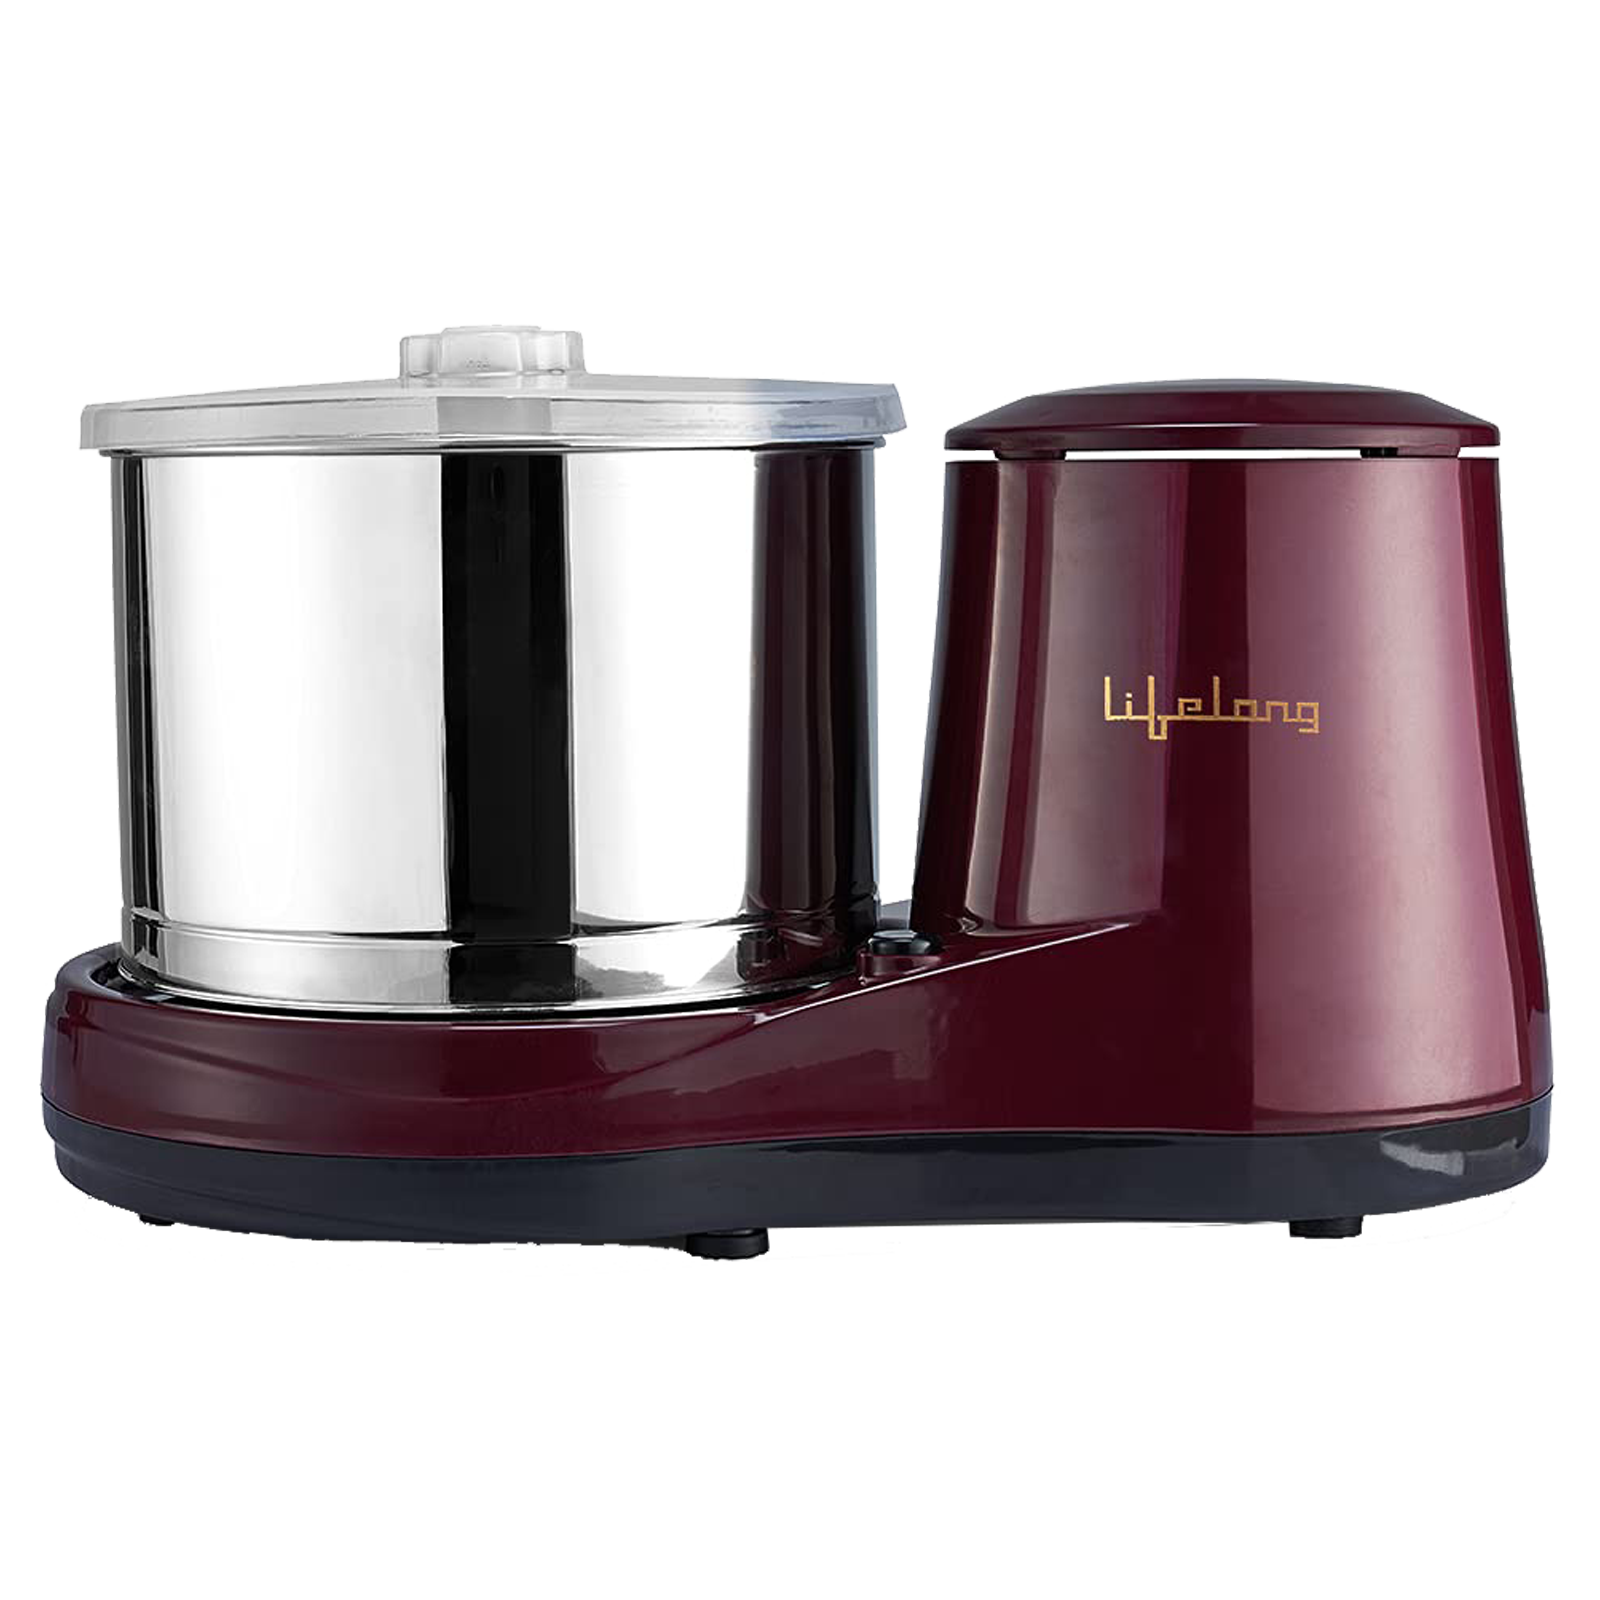 Lifelong Classic Table Top 150 Watts 2 Litres 2 Stones Wet Grinder (Anti-slip belt, LLWG01, Red)_1